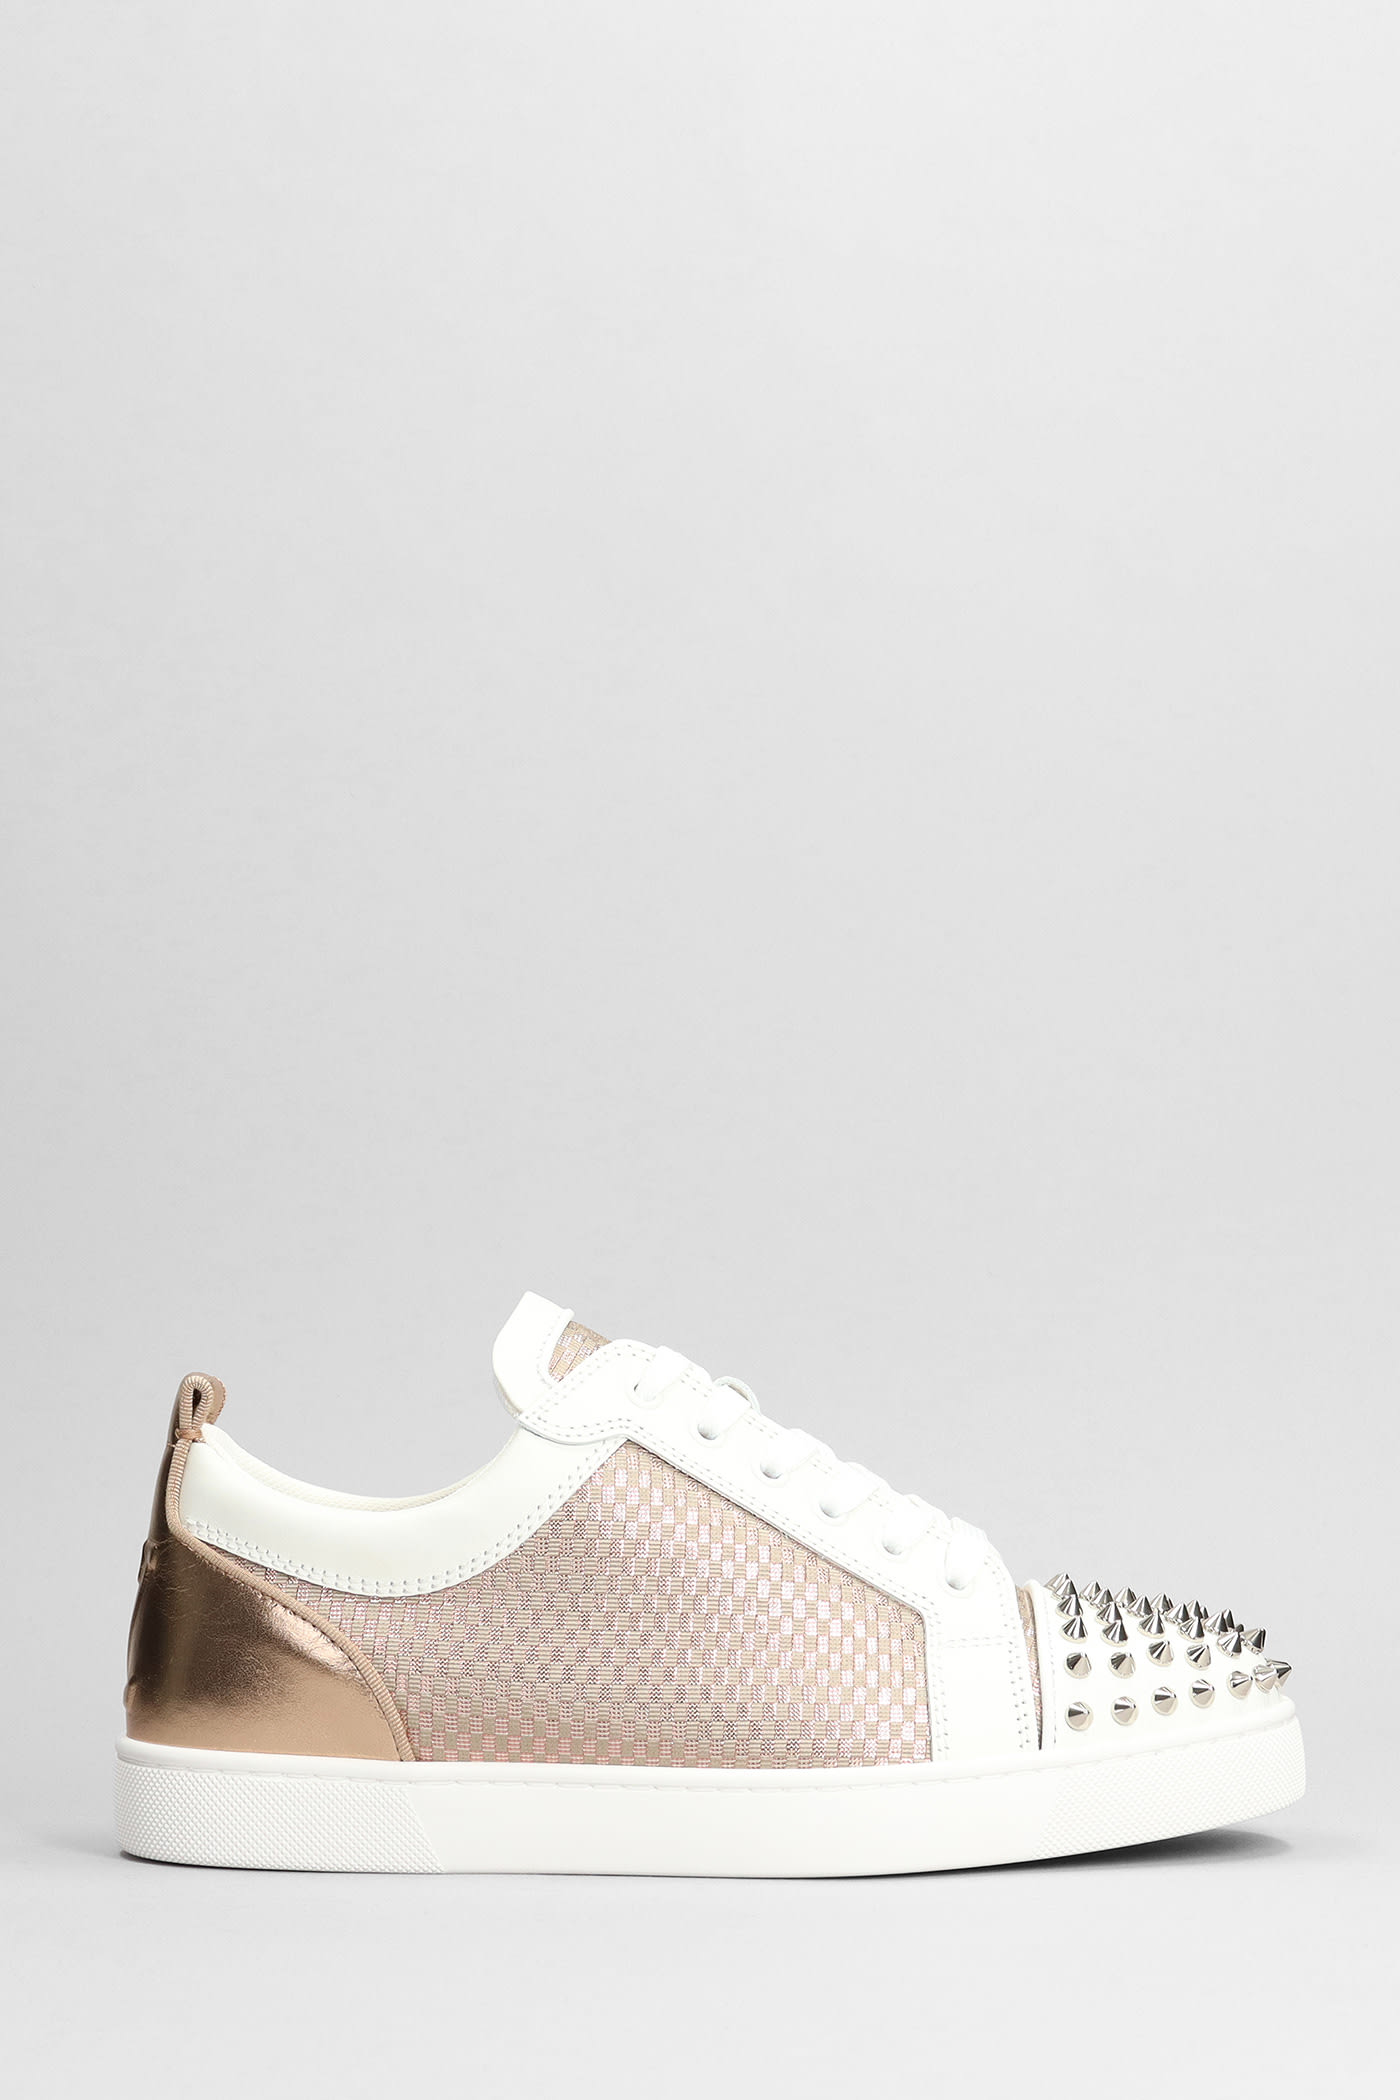 Christian Louboutin Varsijunior Spikes Sneakers In White Leather